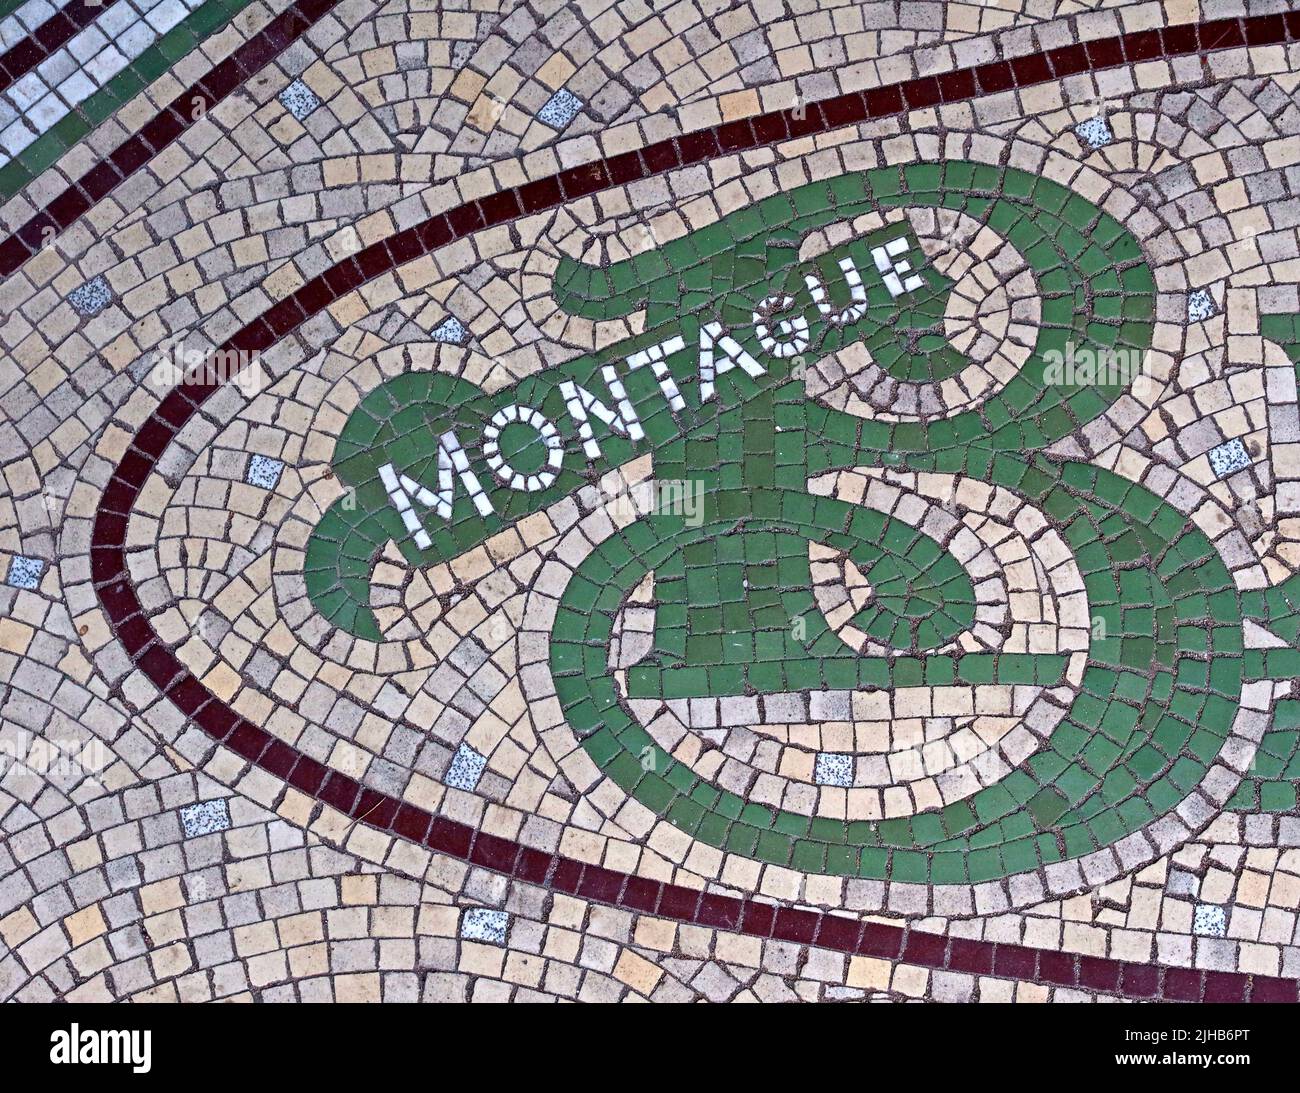 Montague Burton Logo as an entrance mosaic ,the Tailor of Taste,British menswear retailer. Here in an empty shop in Runcorn town, Cheshire,England,UK Stock Photo